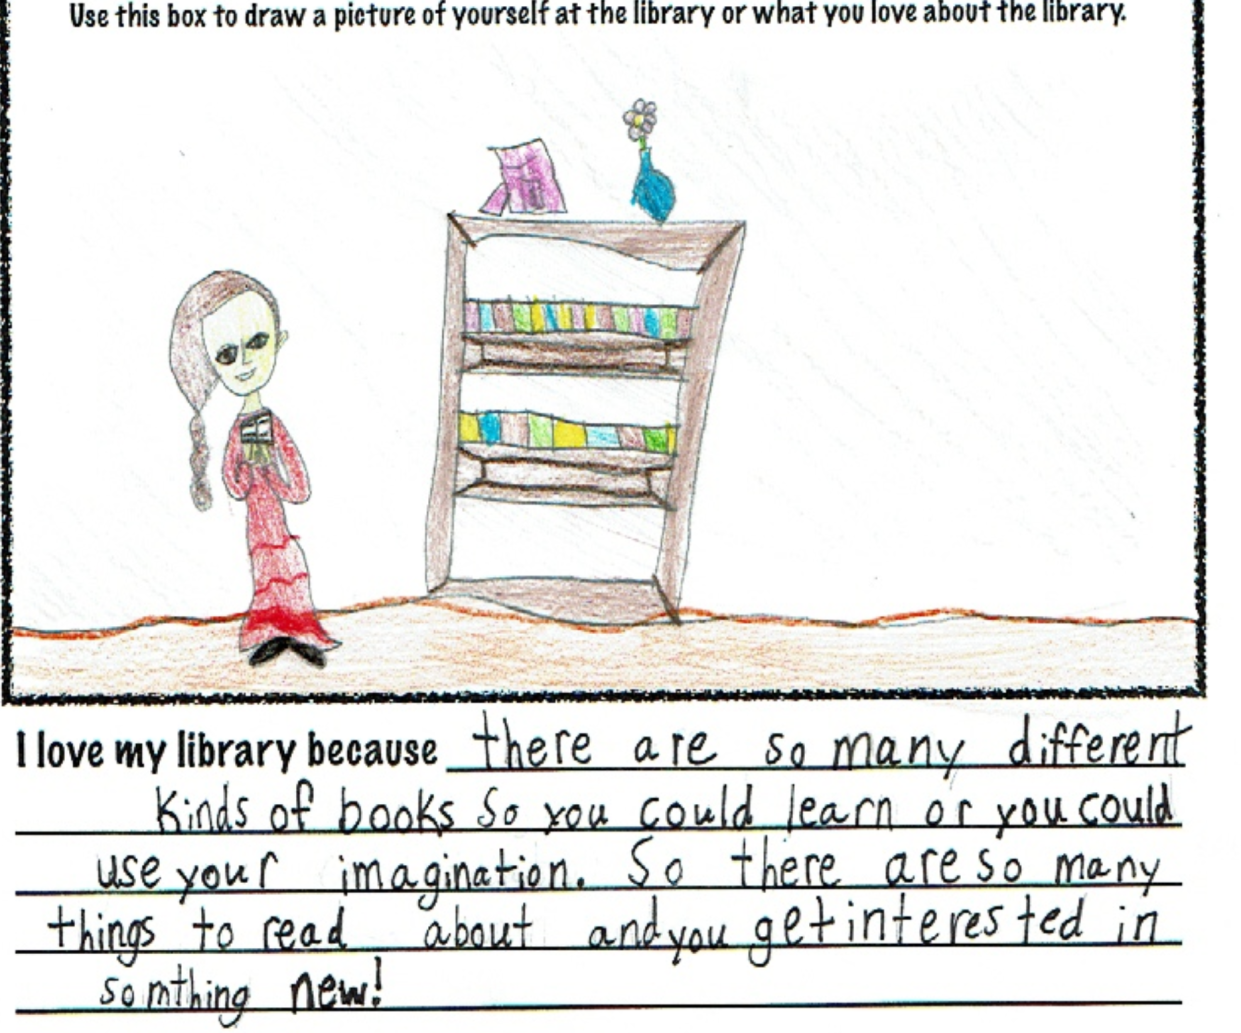 Elliana Combs, daughter of Liz and Joe Combs, loves to spend time at Dalton Branch of the Wayne County Public Library where there are "so many things to read."